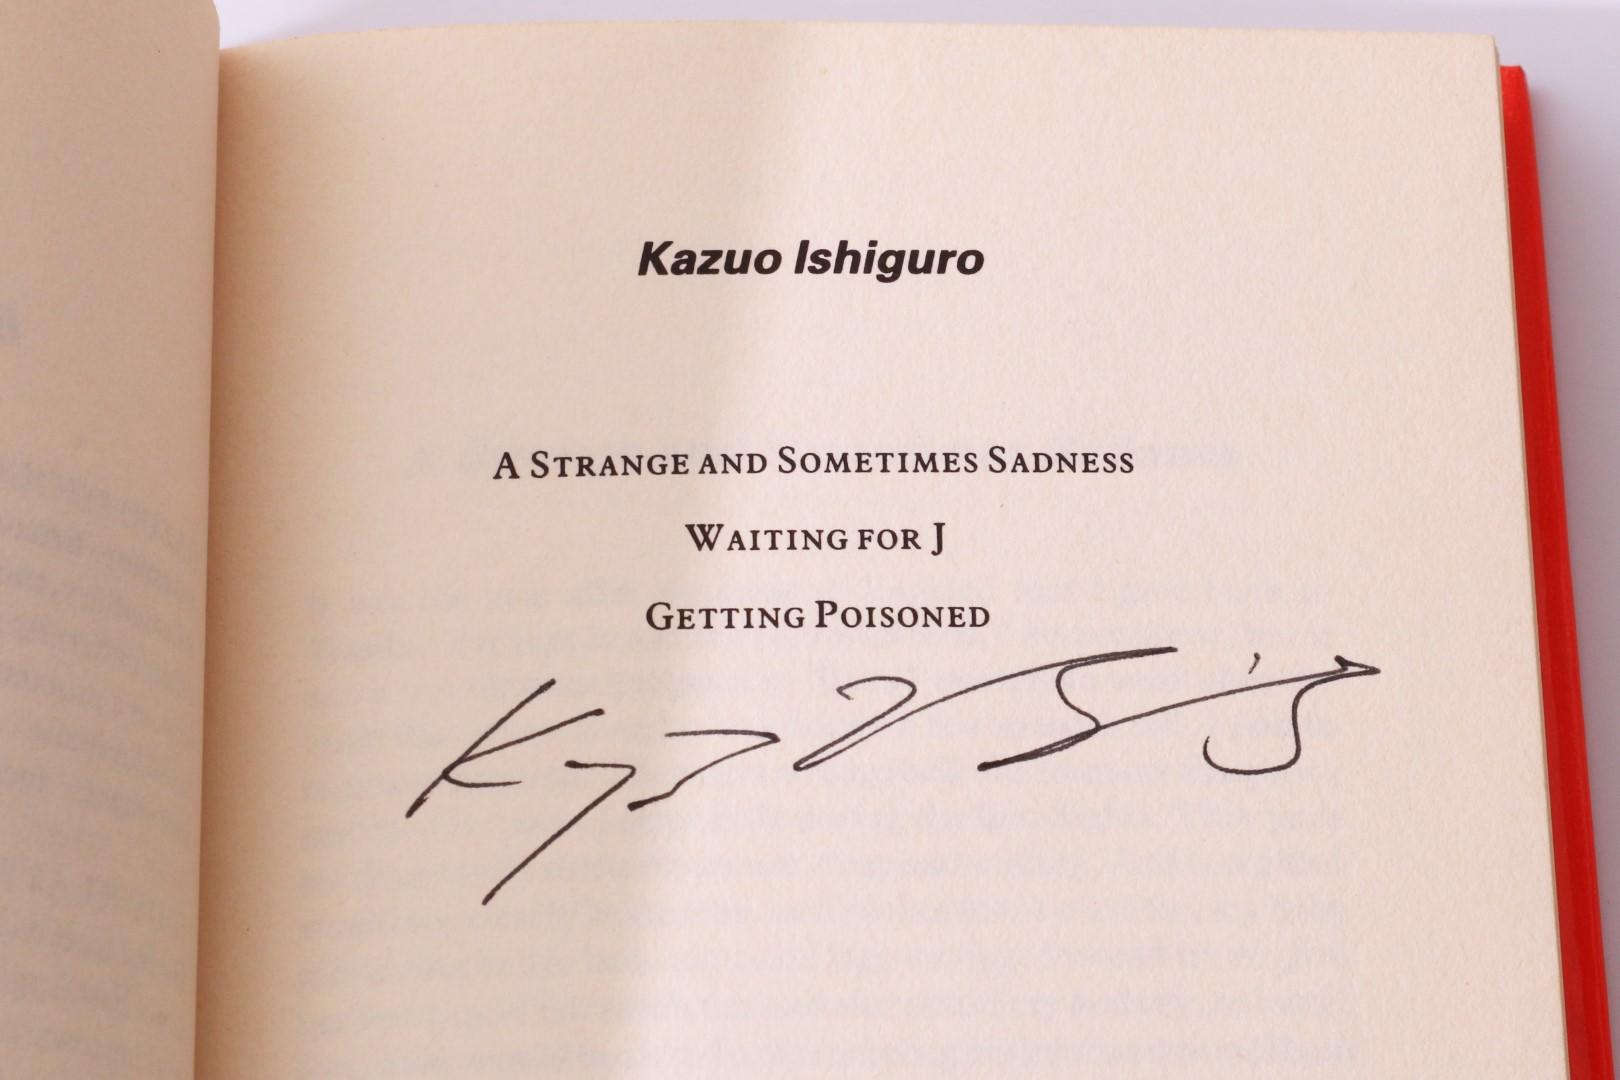 Kazuo Ishiguro - Introductions 7 - Stories by New Writers - Faber & Faber, 1981, Signed First Edition.